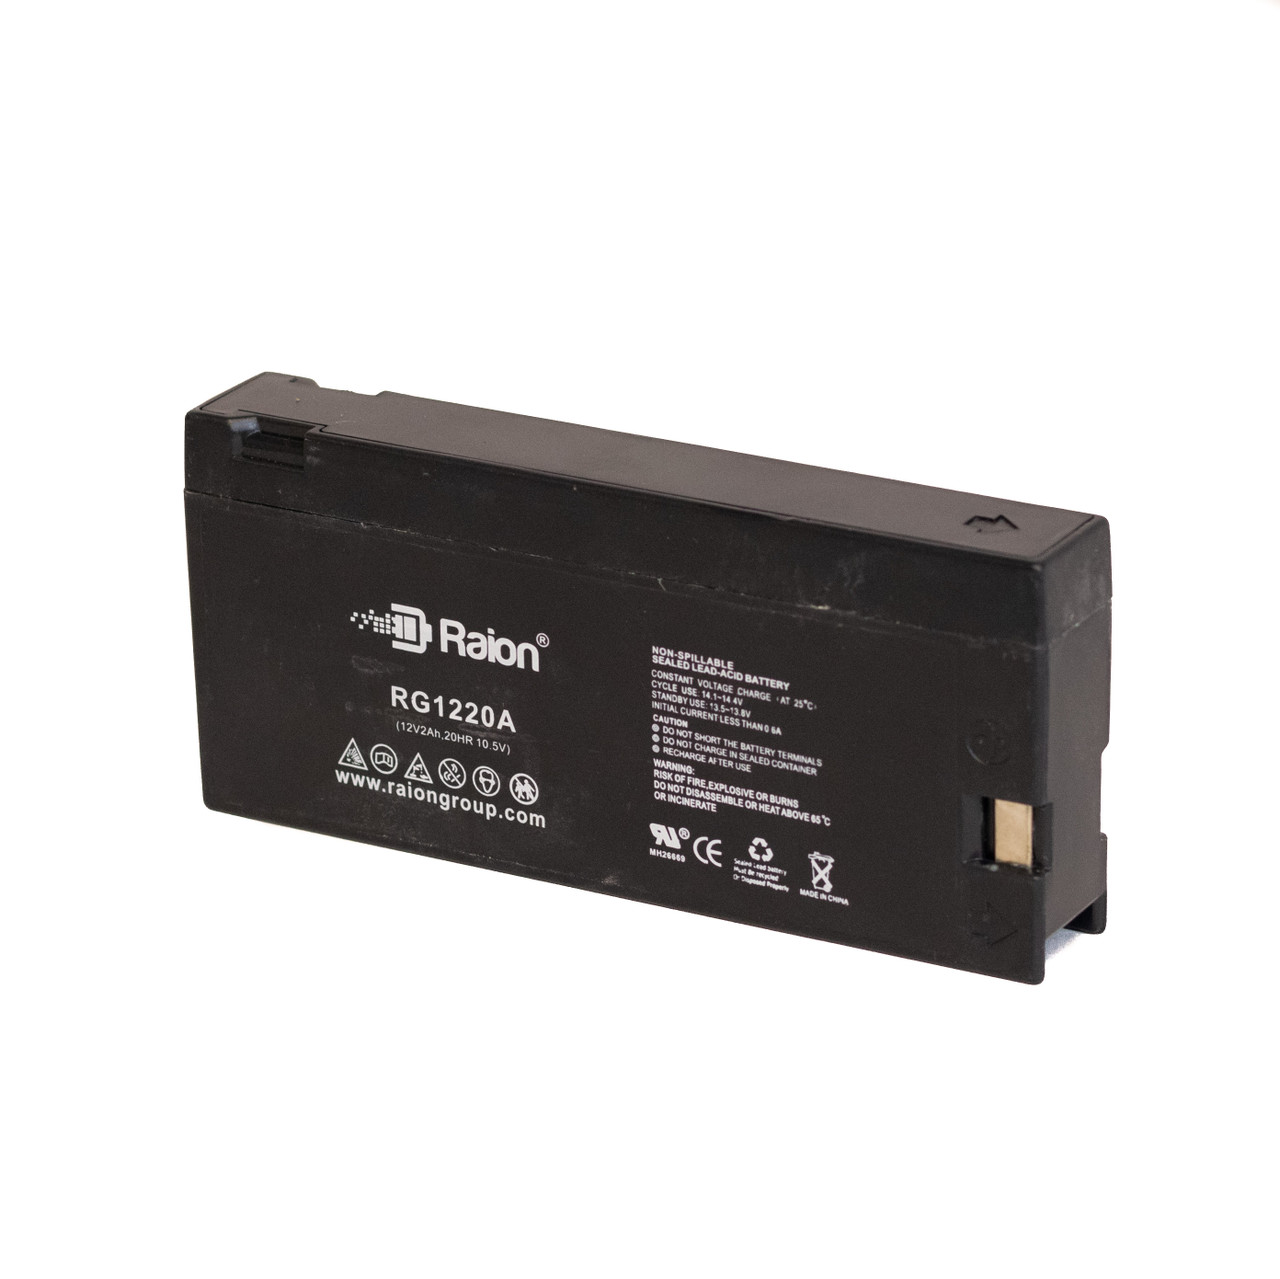 Raion Power RG1220A Replacement Battery for Magnavox CVJ-360